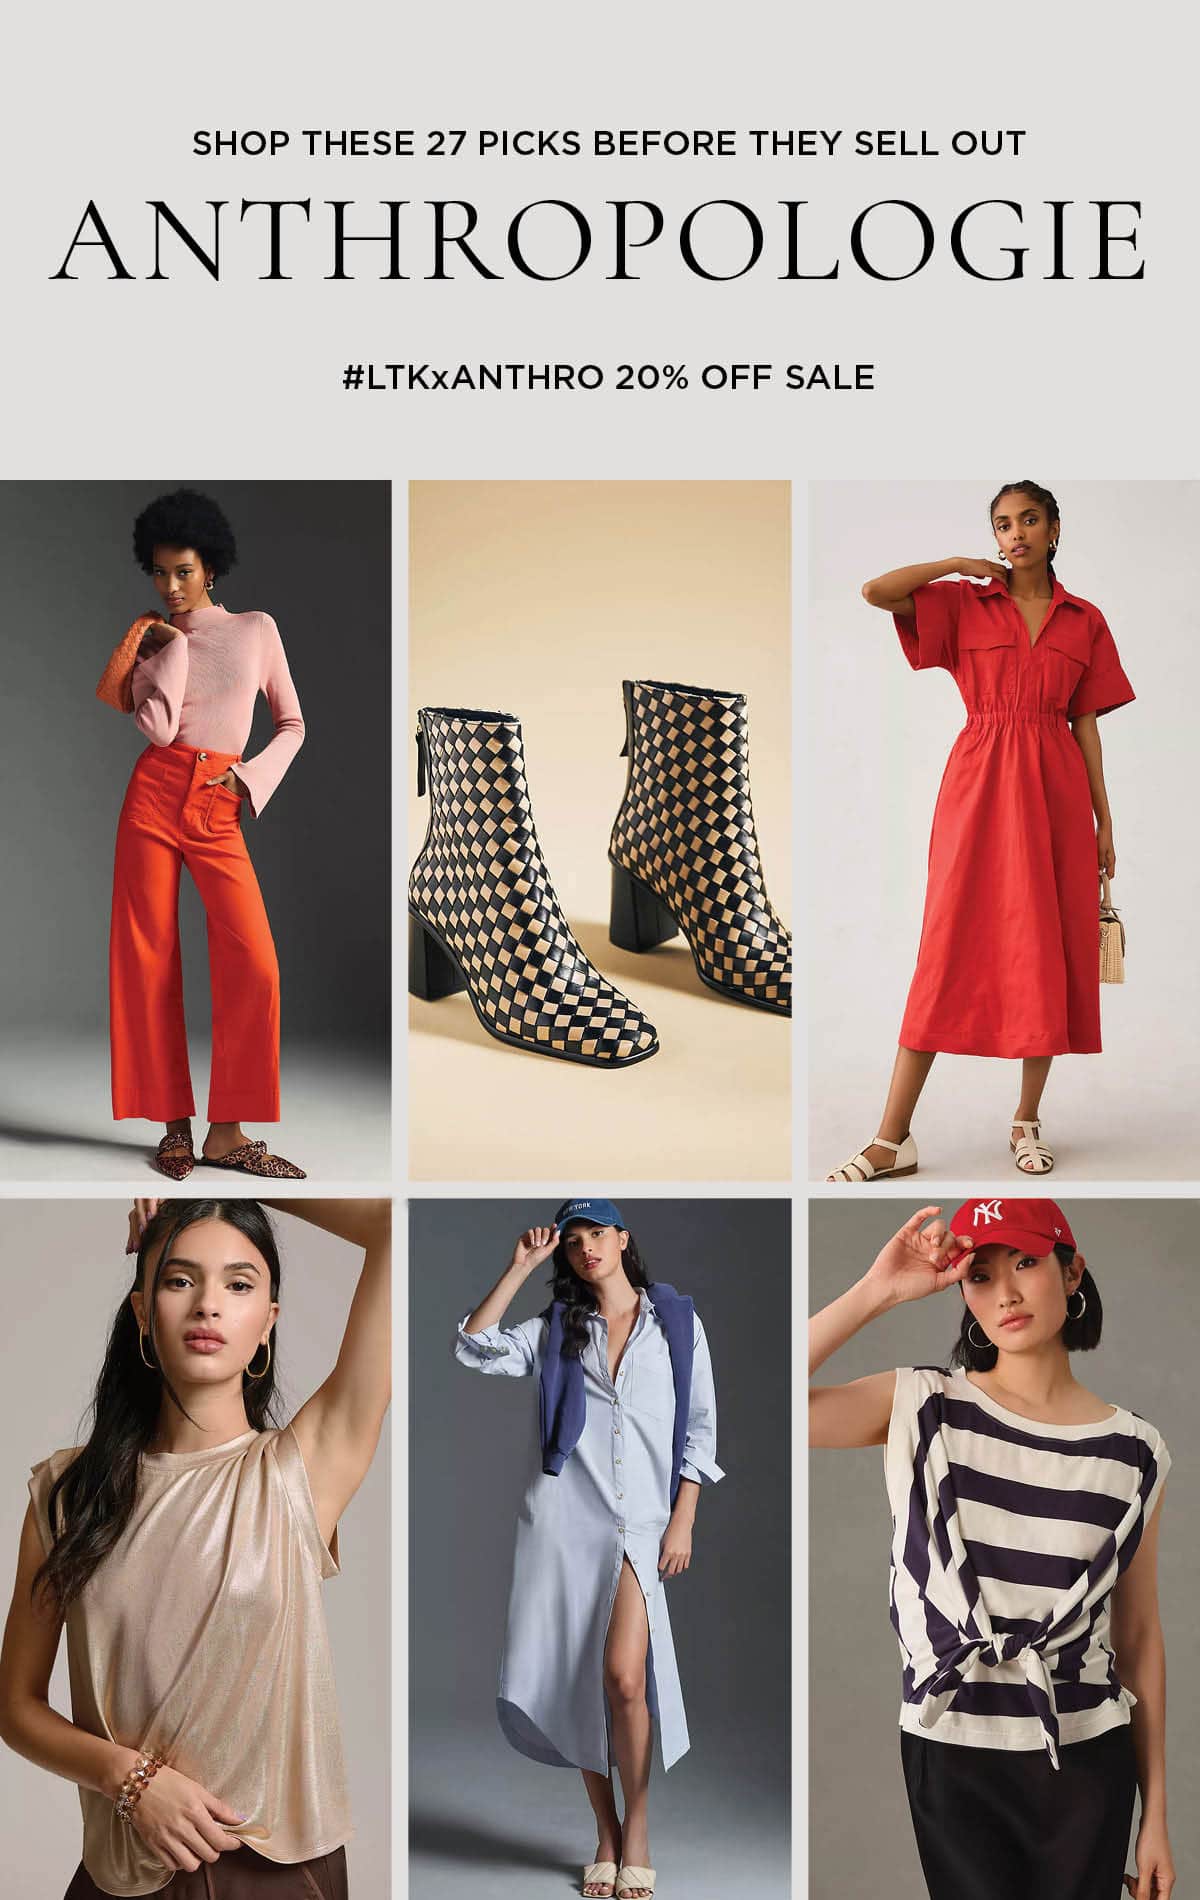 Sale Alert! Shop These 27 Anthro's Pieces Before They Sell Out - Shop these top picks during the the #LTKxAnthro 20% off sale.